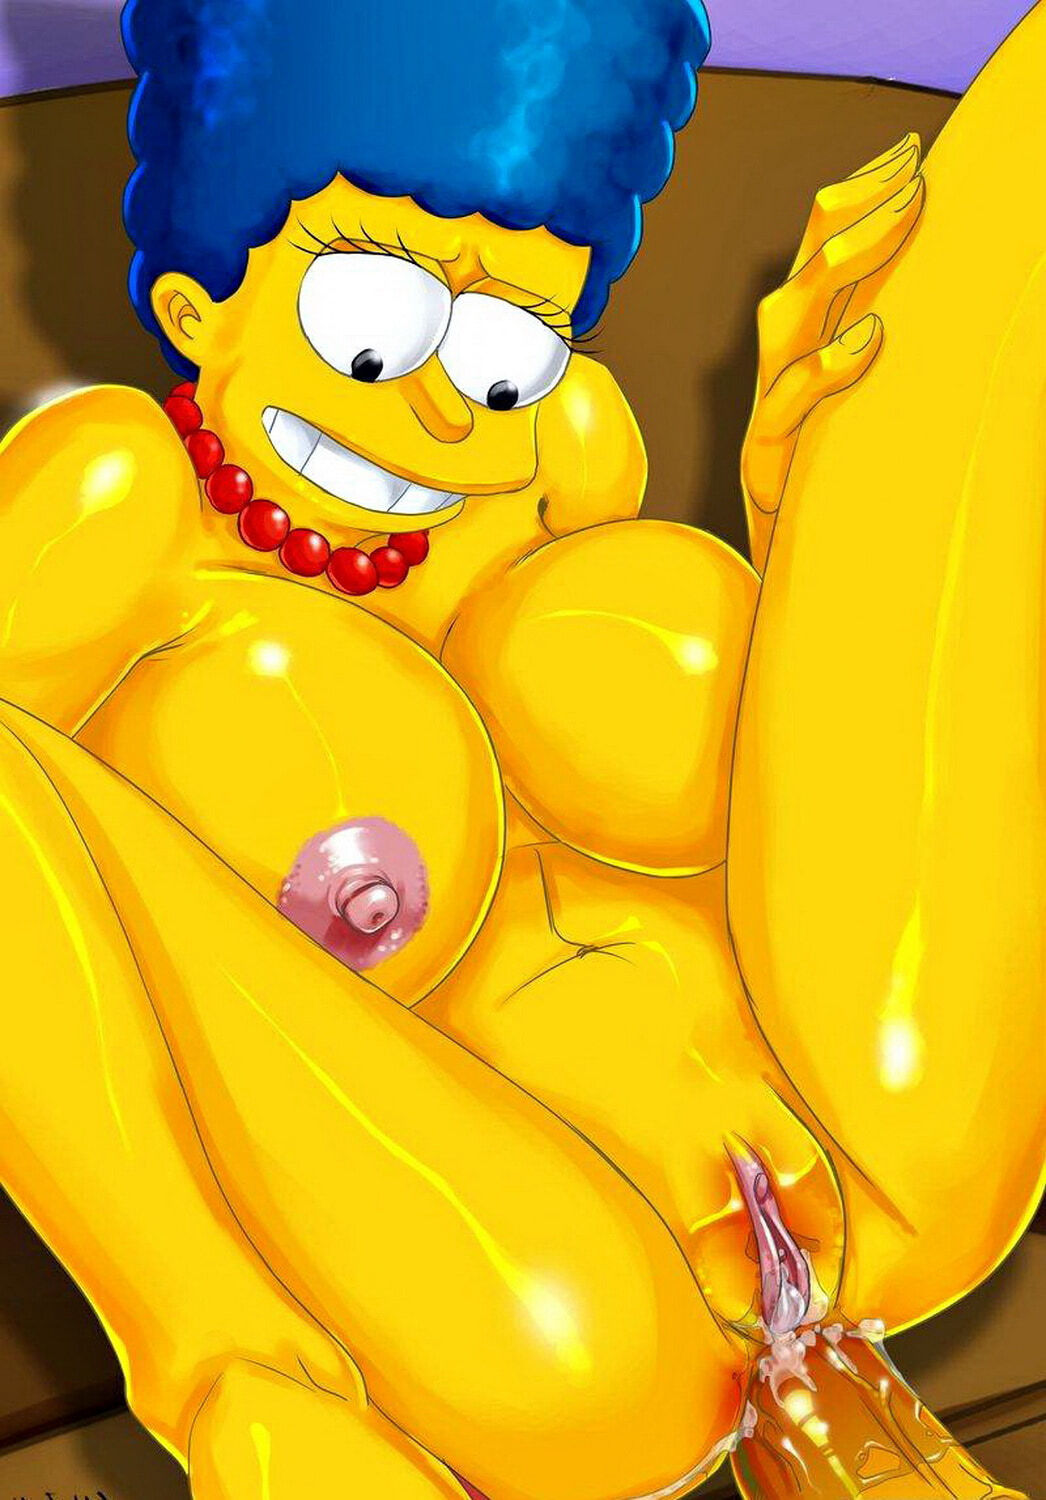 Anal Sex Drawings - Marge Simpson Anal Sex Drawing > Your Cartoon Porn